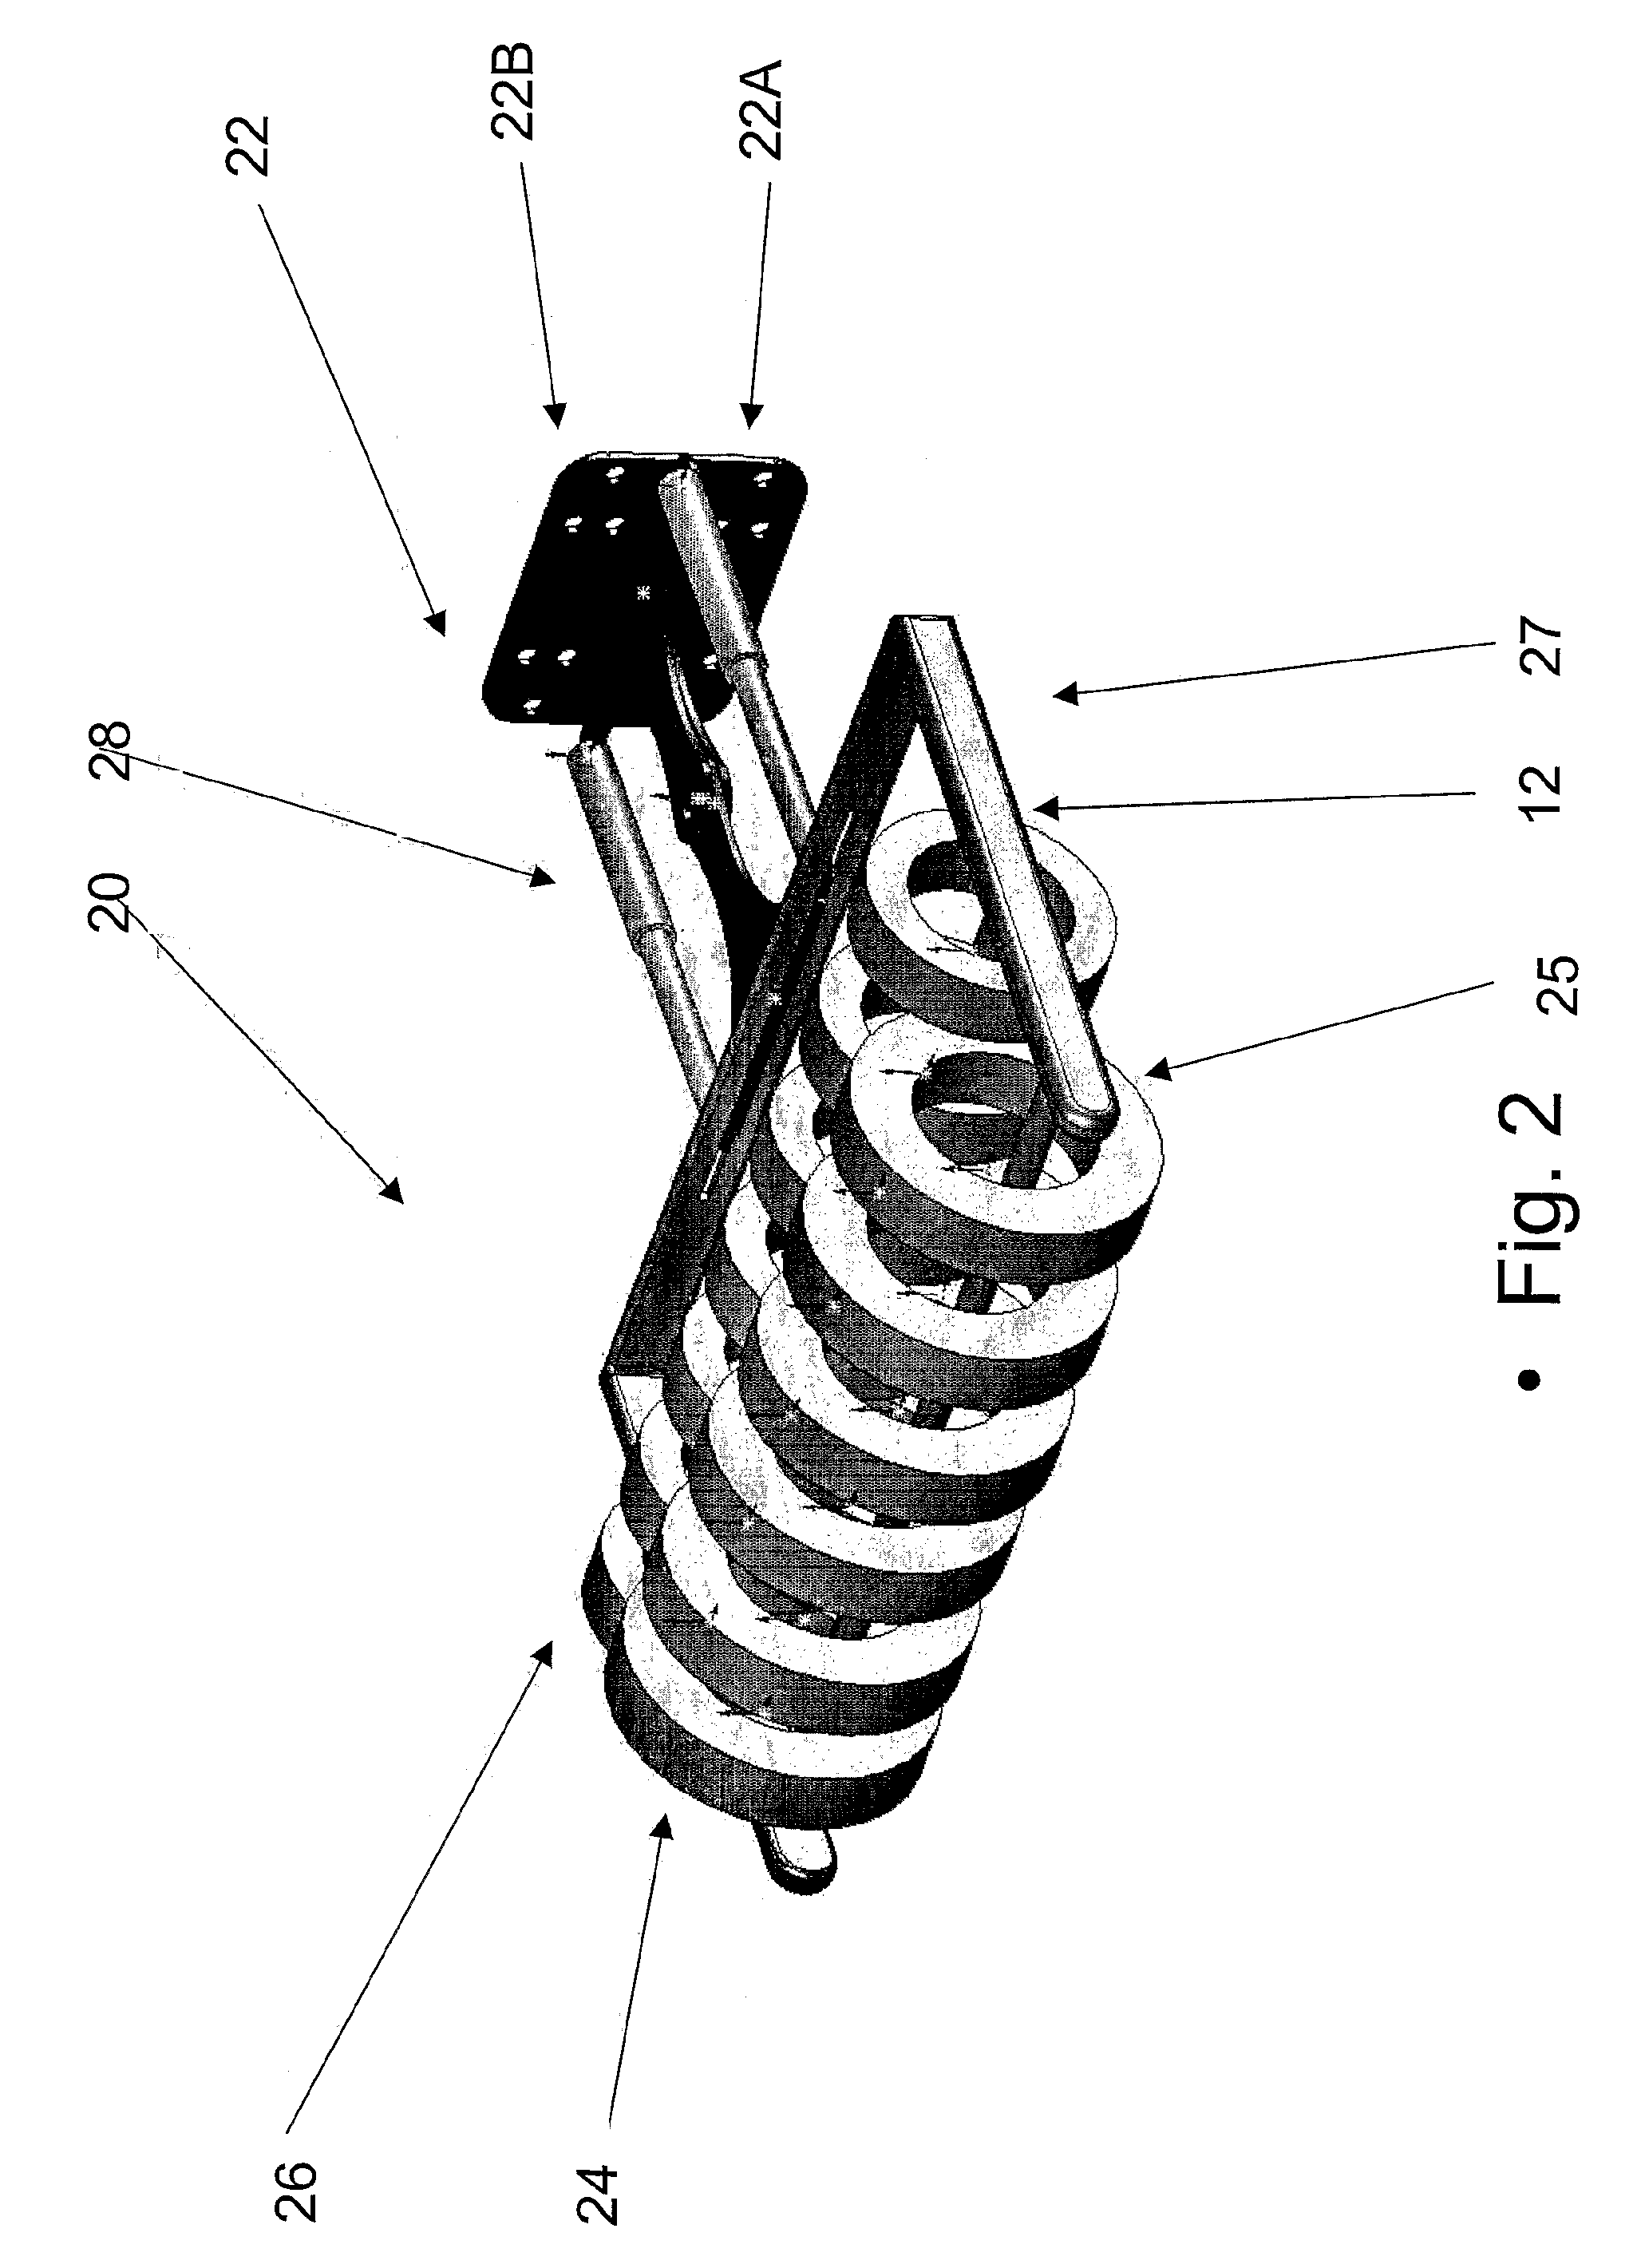 Apparatus and Method for Clearing Land Mines